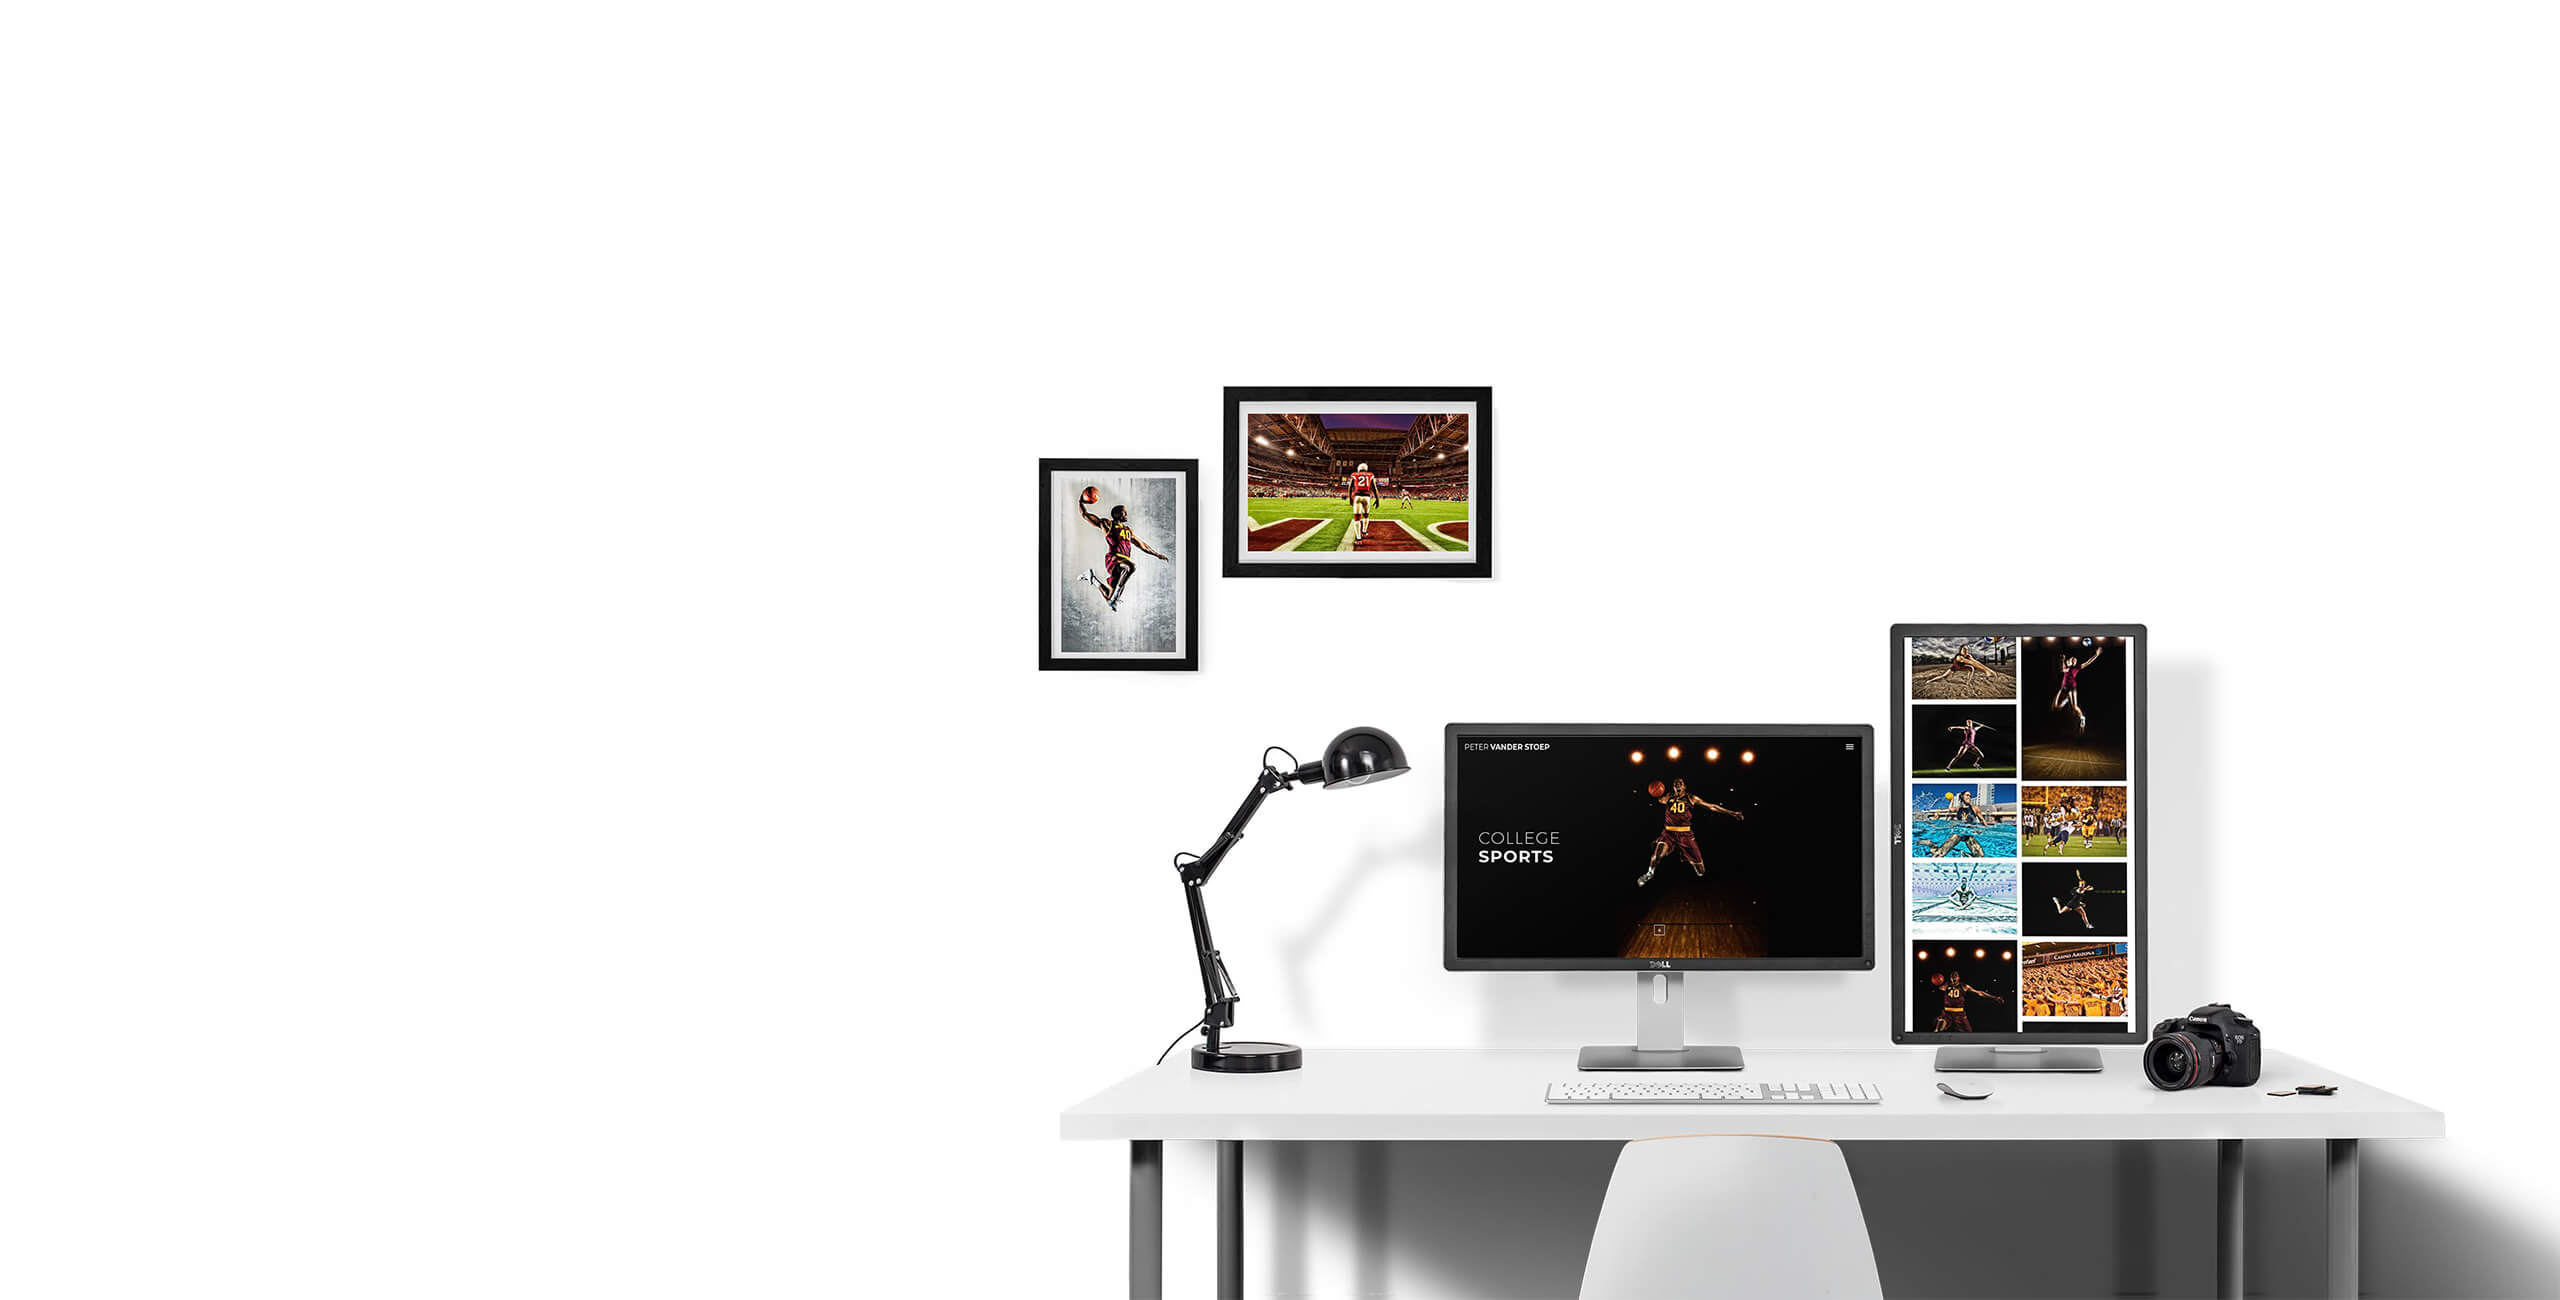 professional photography website design mockup on various display types